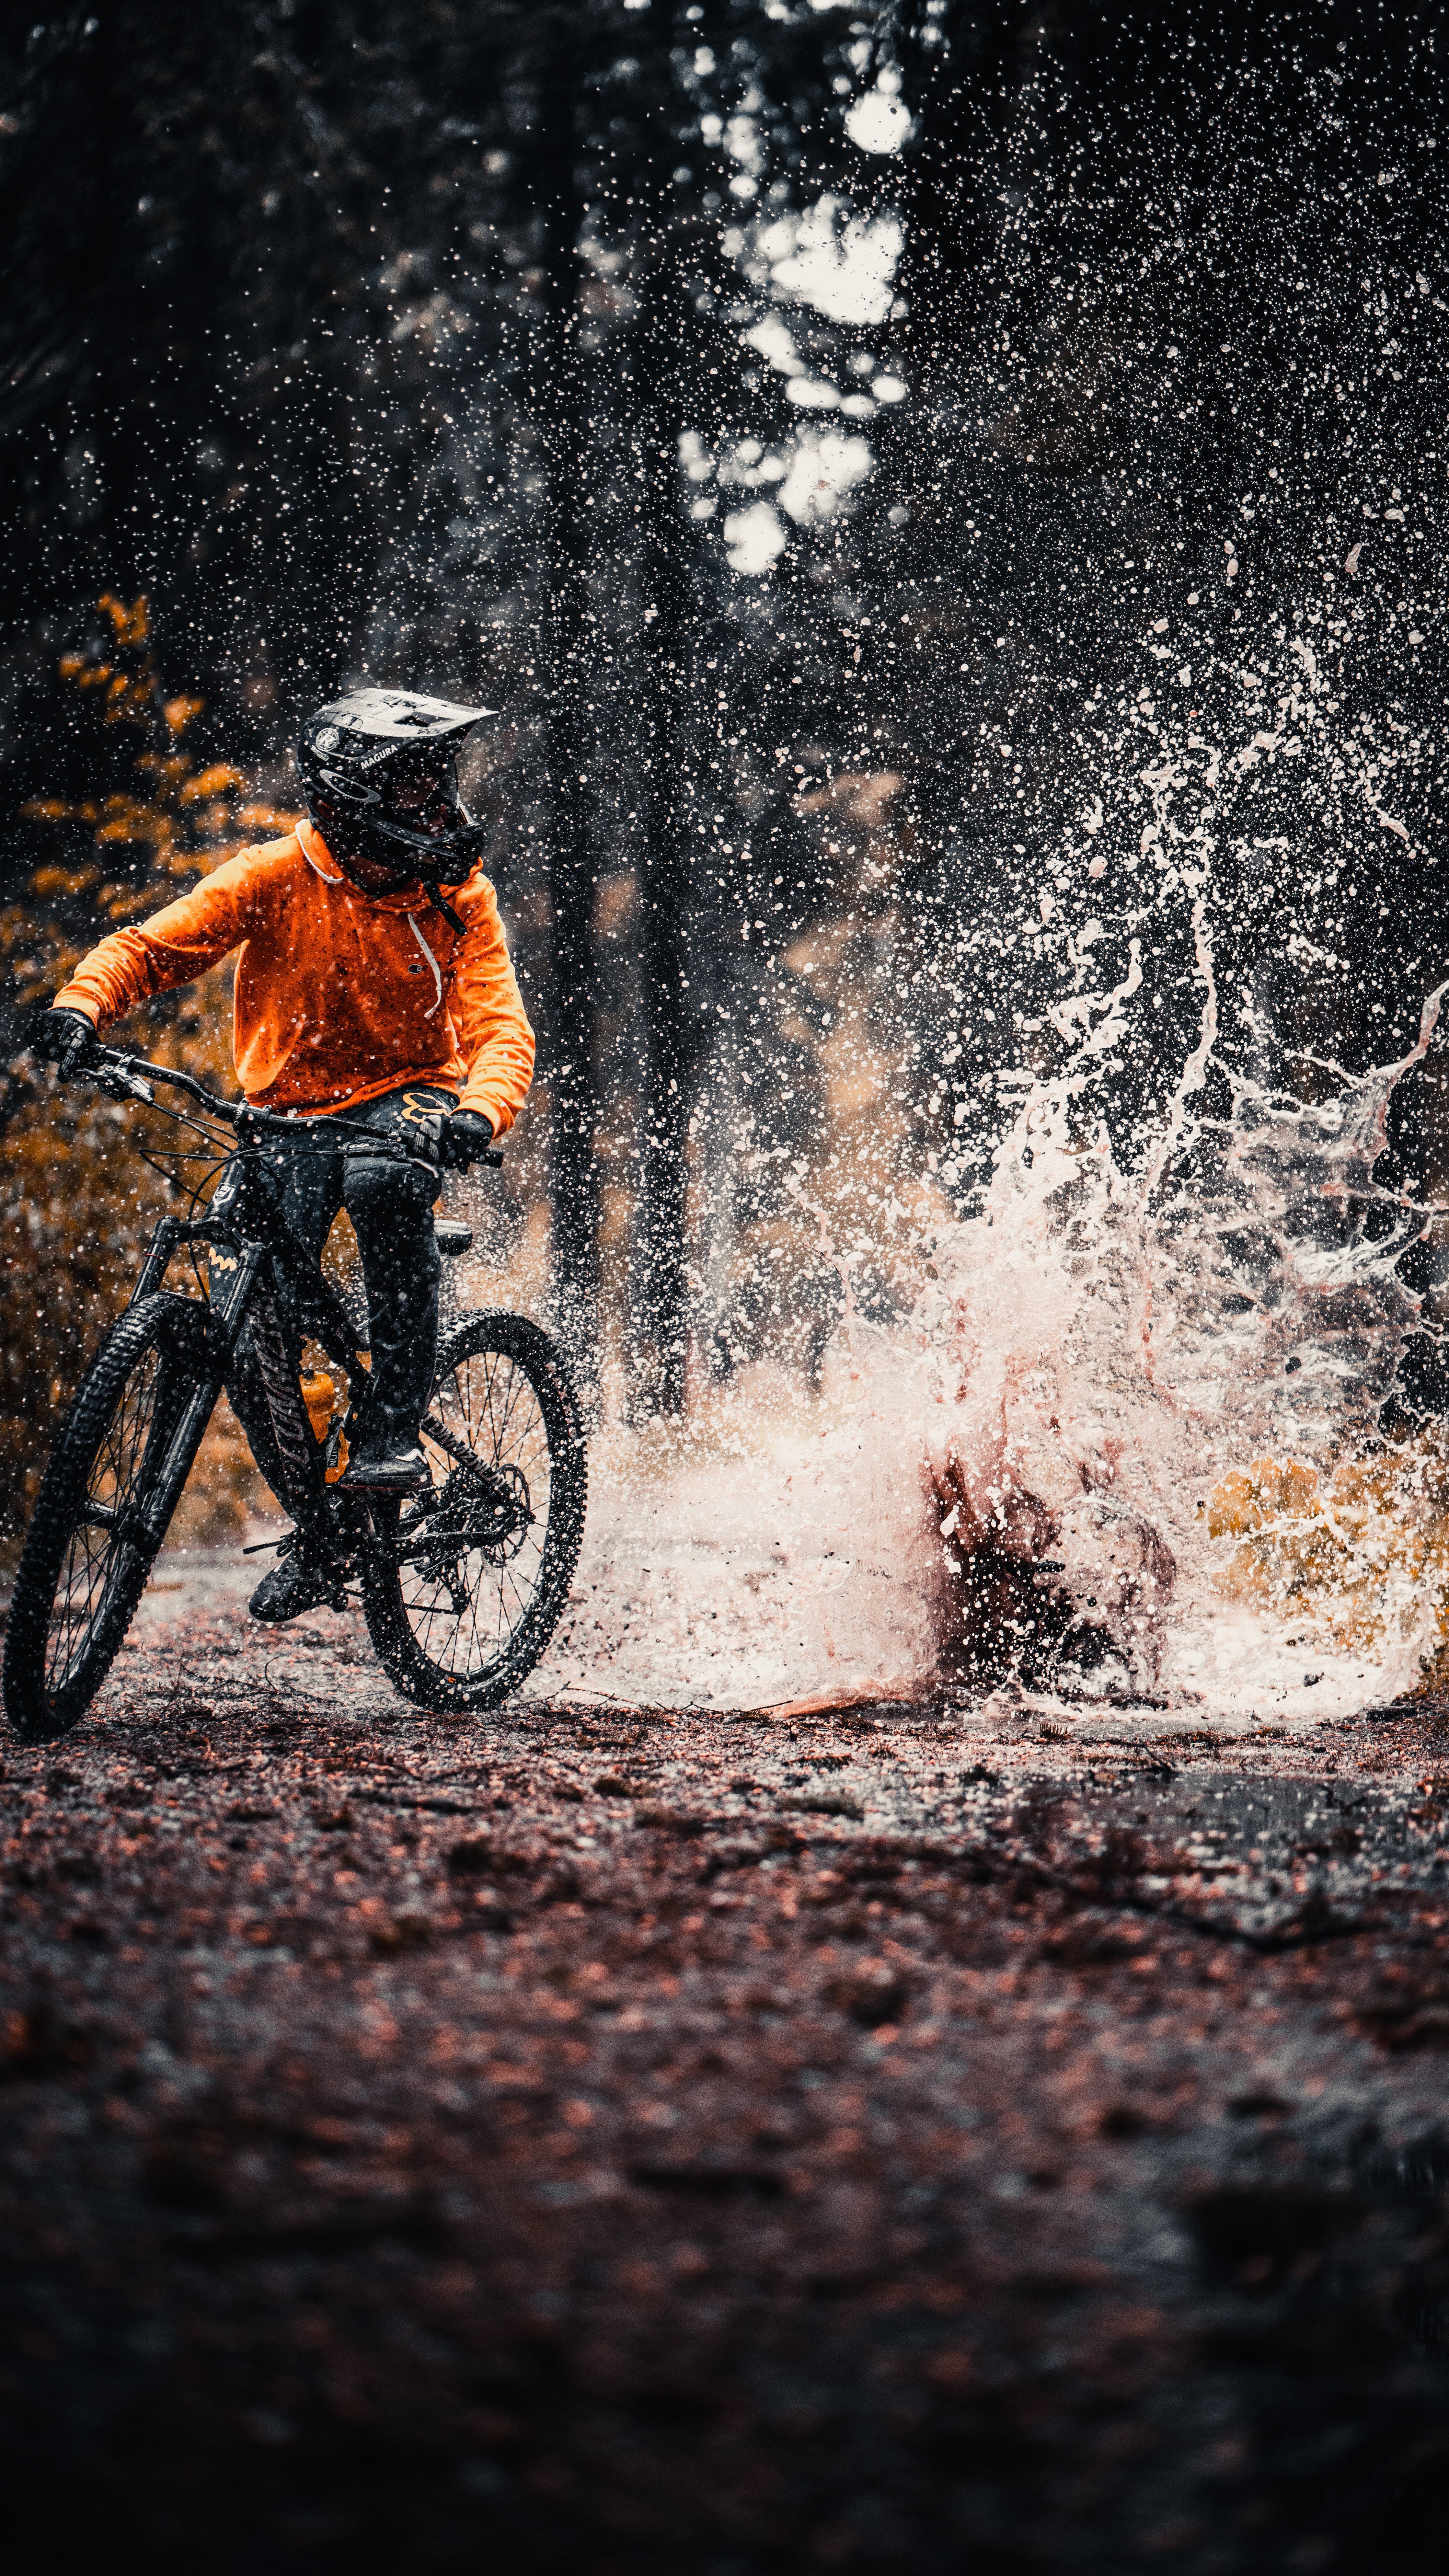 spray, bicycle, sports, puddle, extreme, cyclist